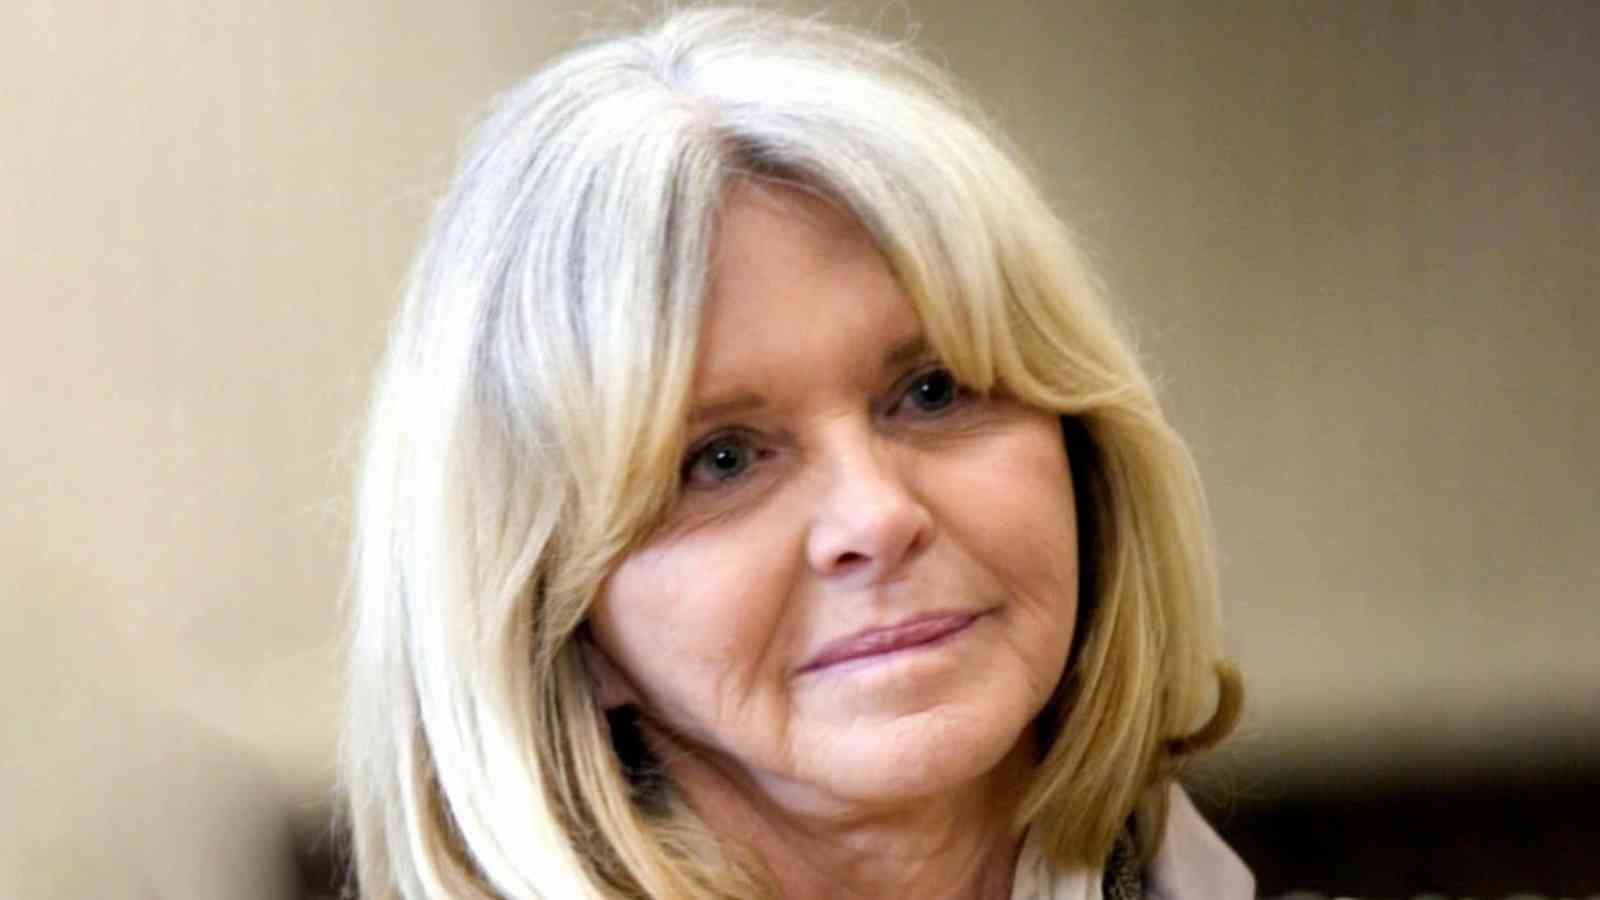 Melinda Dillon Cause Of Death, A Christmas Story actor dies at 83